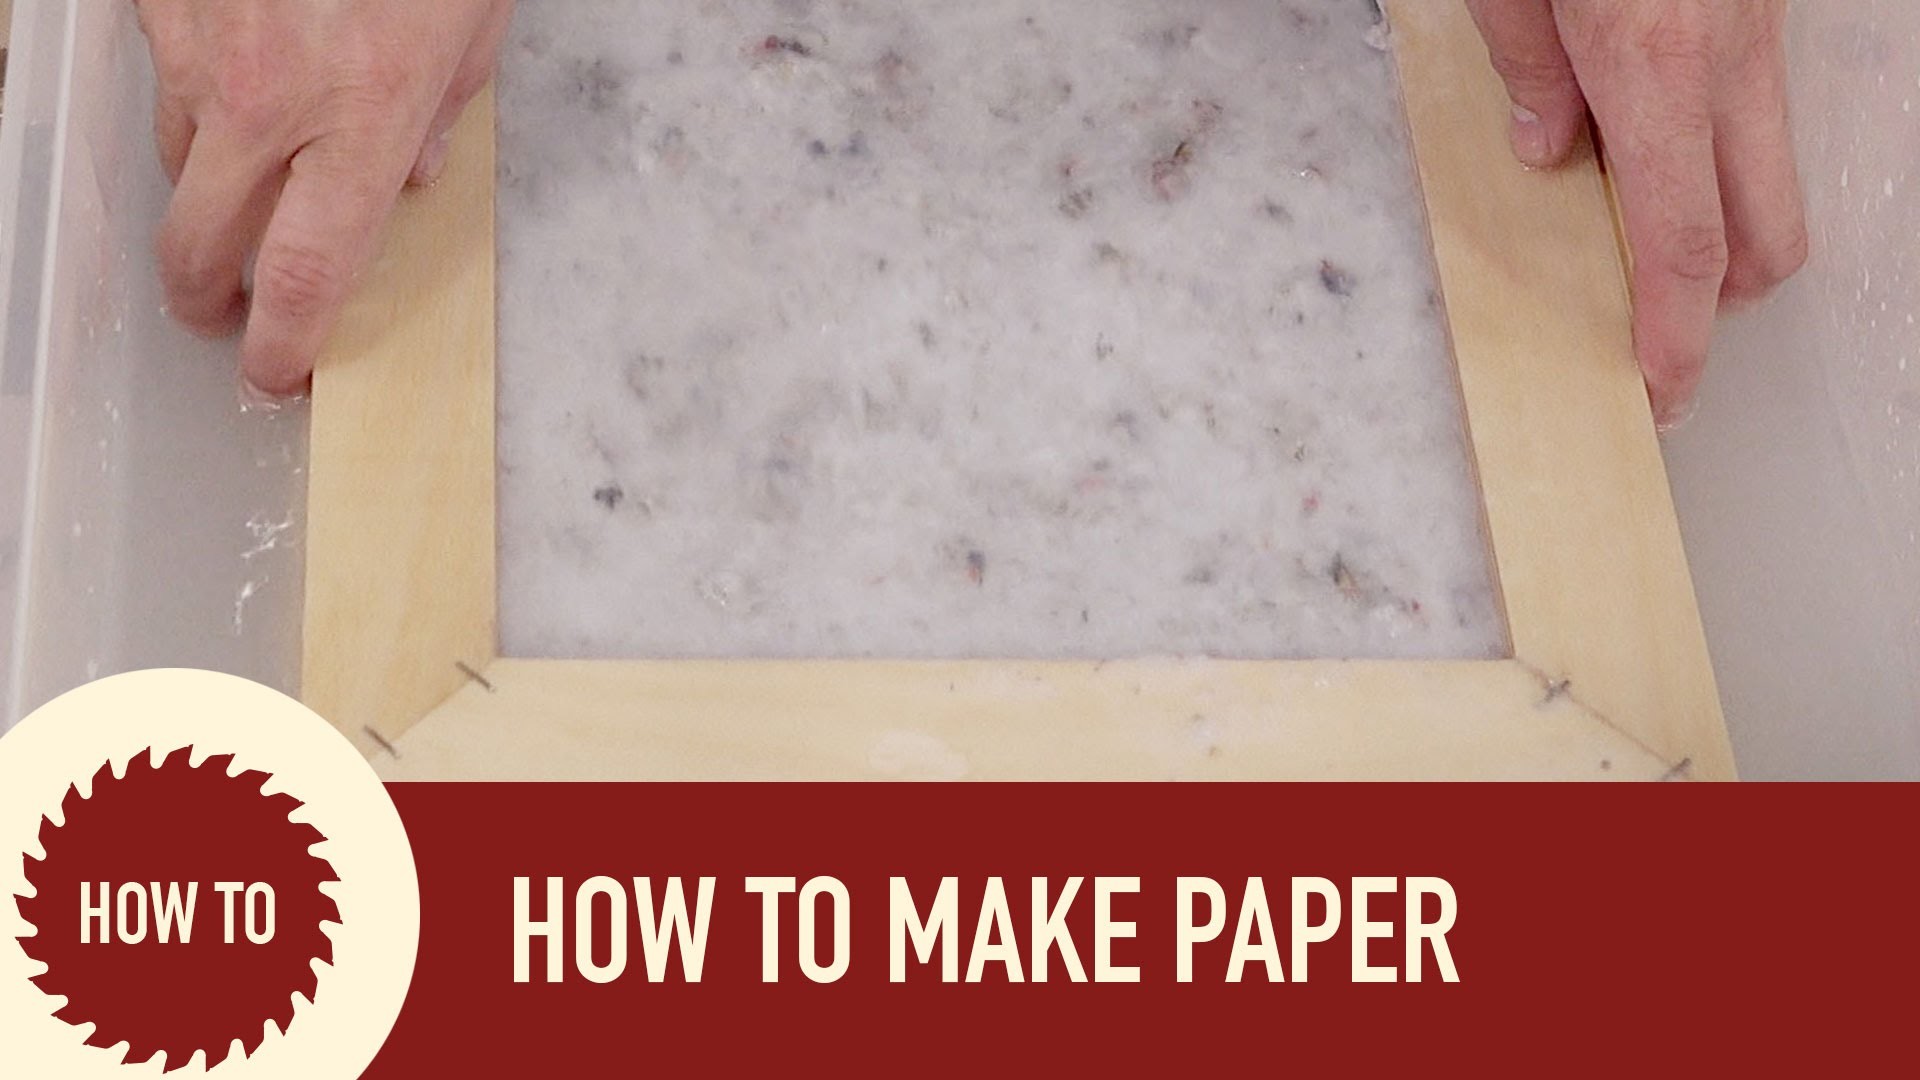 How to Make Paper (out of recycled paper)